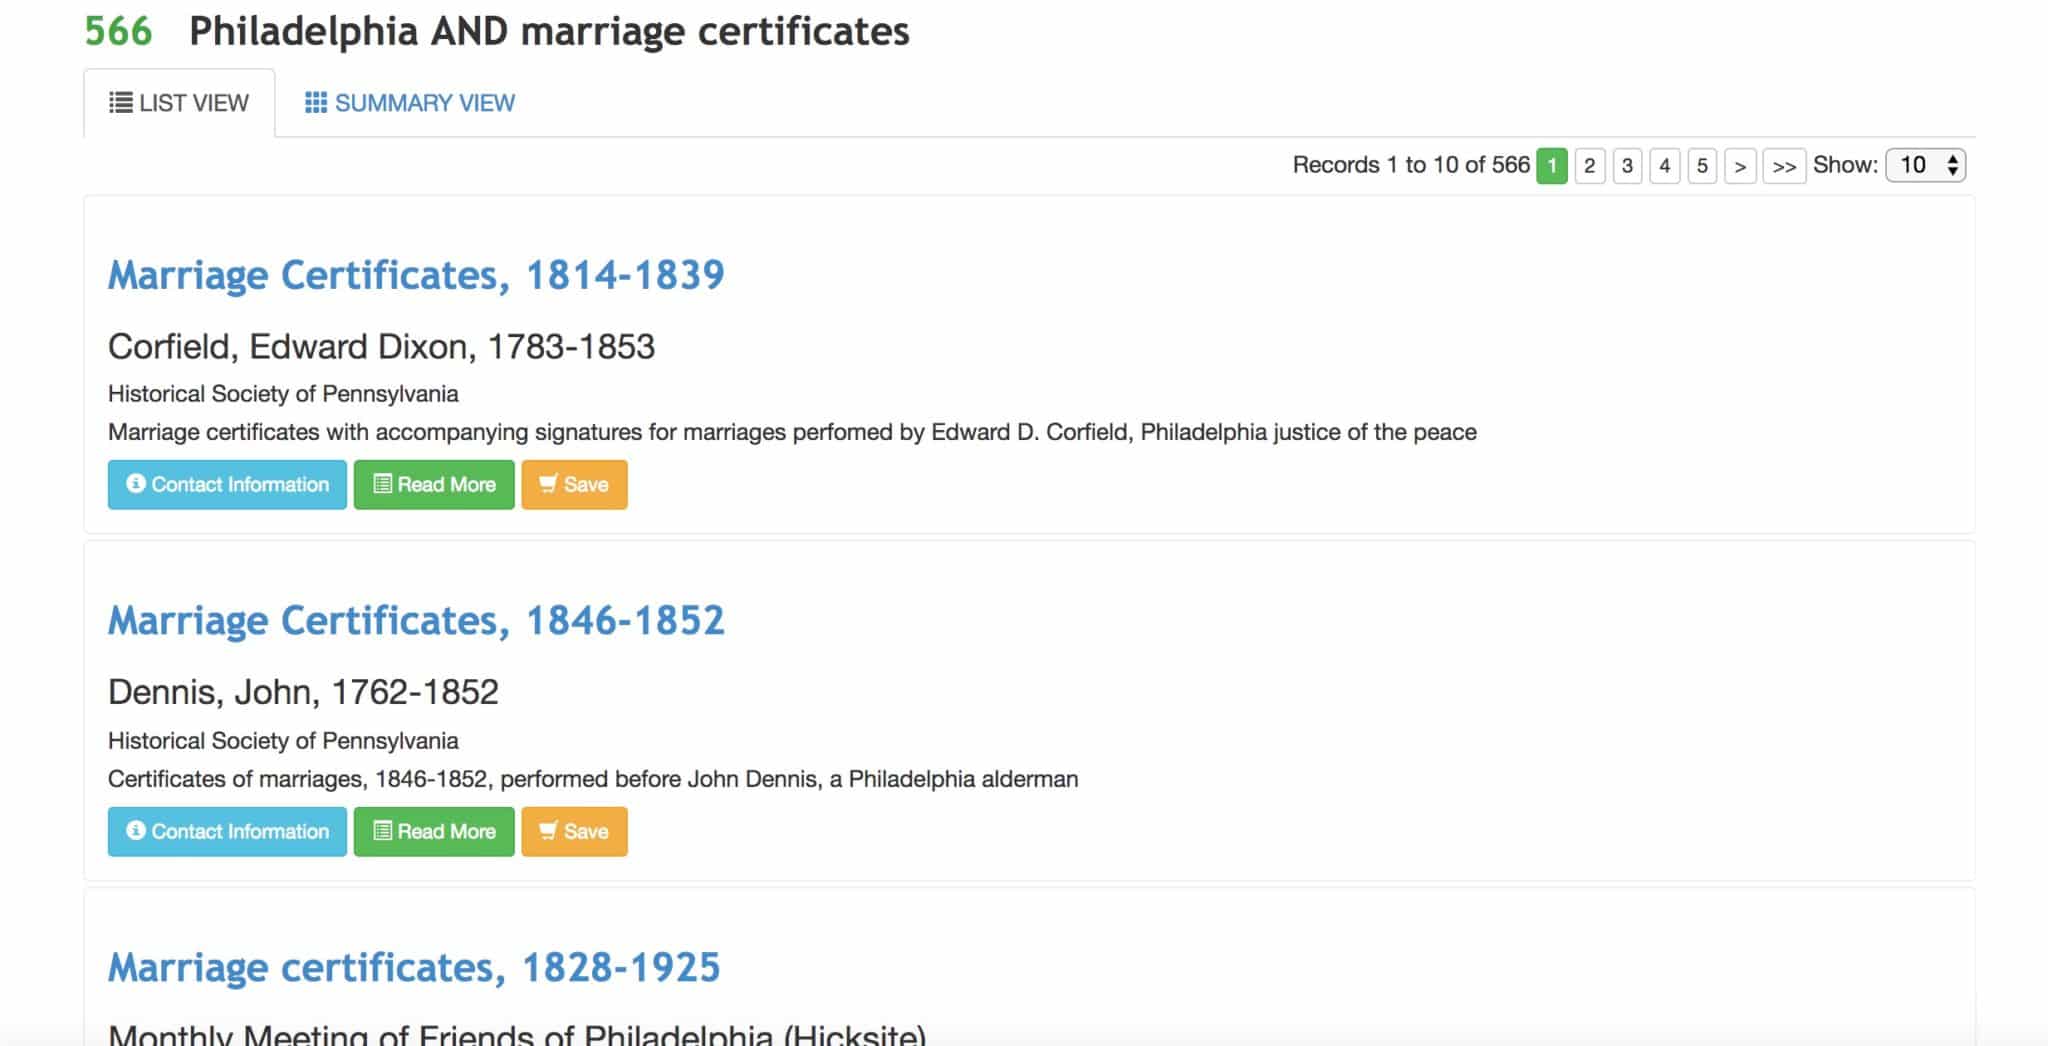 Search results for Philadelphia marriage certificates on ArchiveGrid